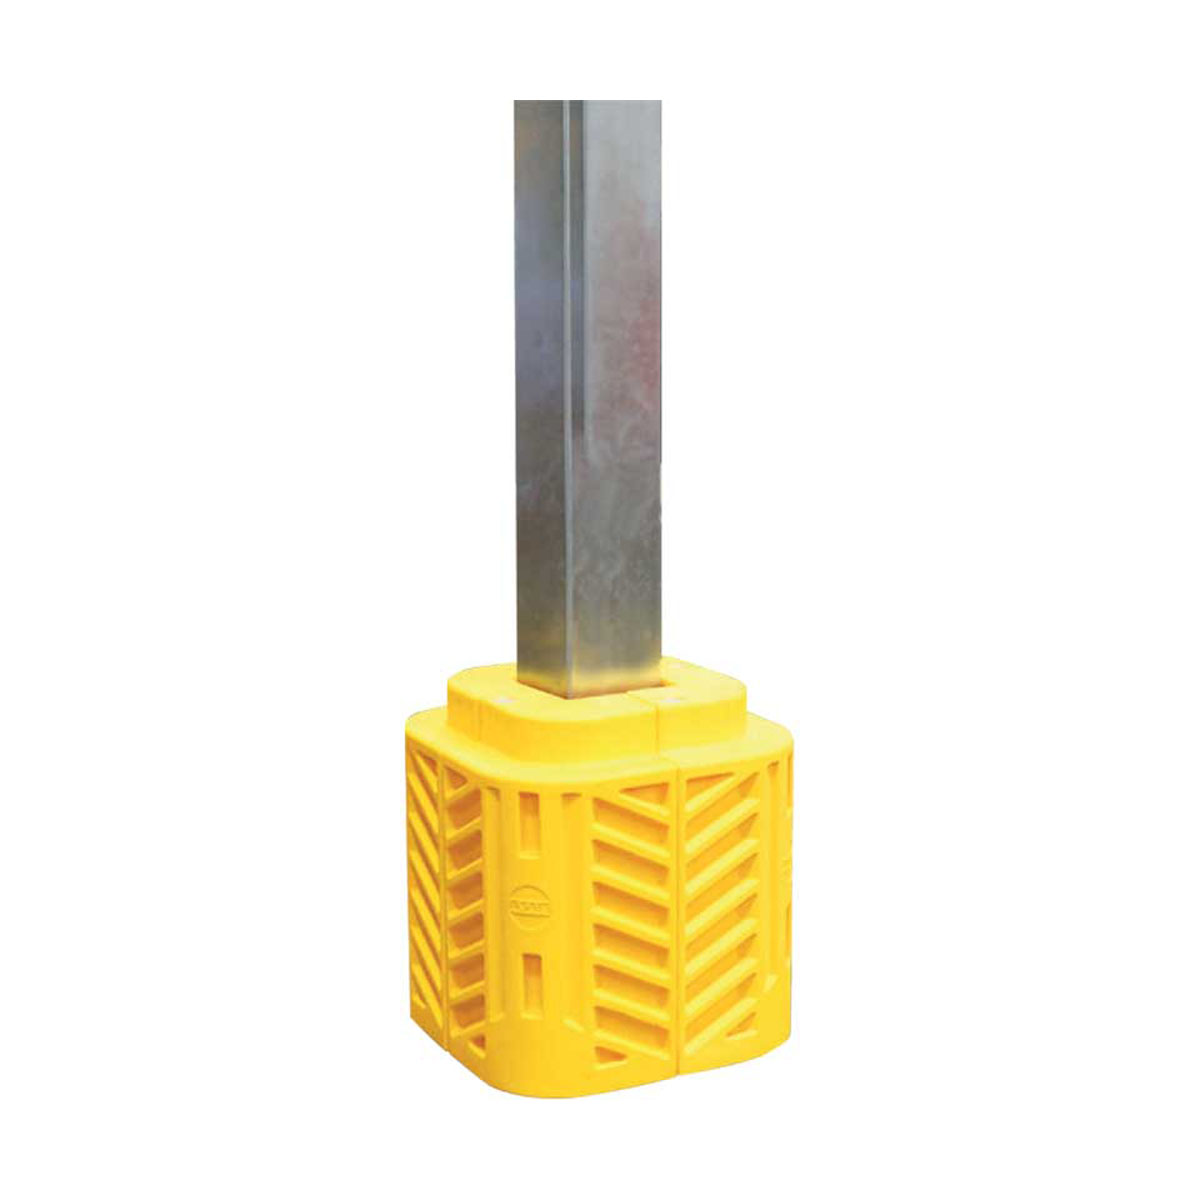 Buy Column Protectors - A-Safe (Flexible Plastic) in Corner & Pillar Protection from A-Safe available at Astrolift NZ